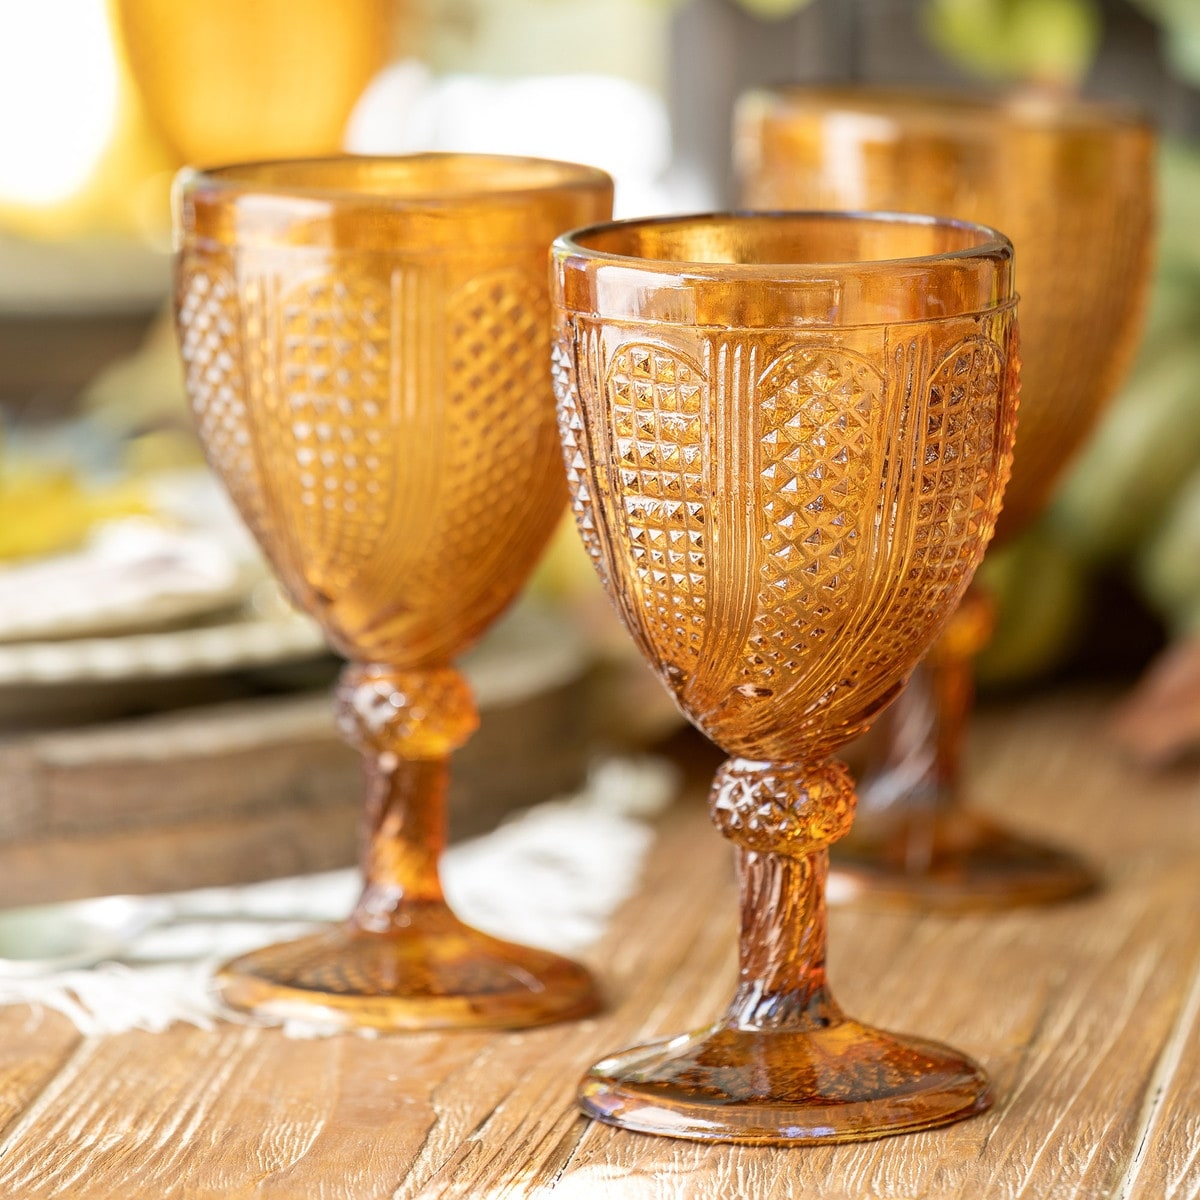 https://ak1.ostkcdn.com/images/products/is/images/direct/eaed2fe6ddb802dfe990f3d5b91c5bcafc33ad91/Vintage-Glass-Goblet.jpg